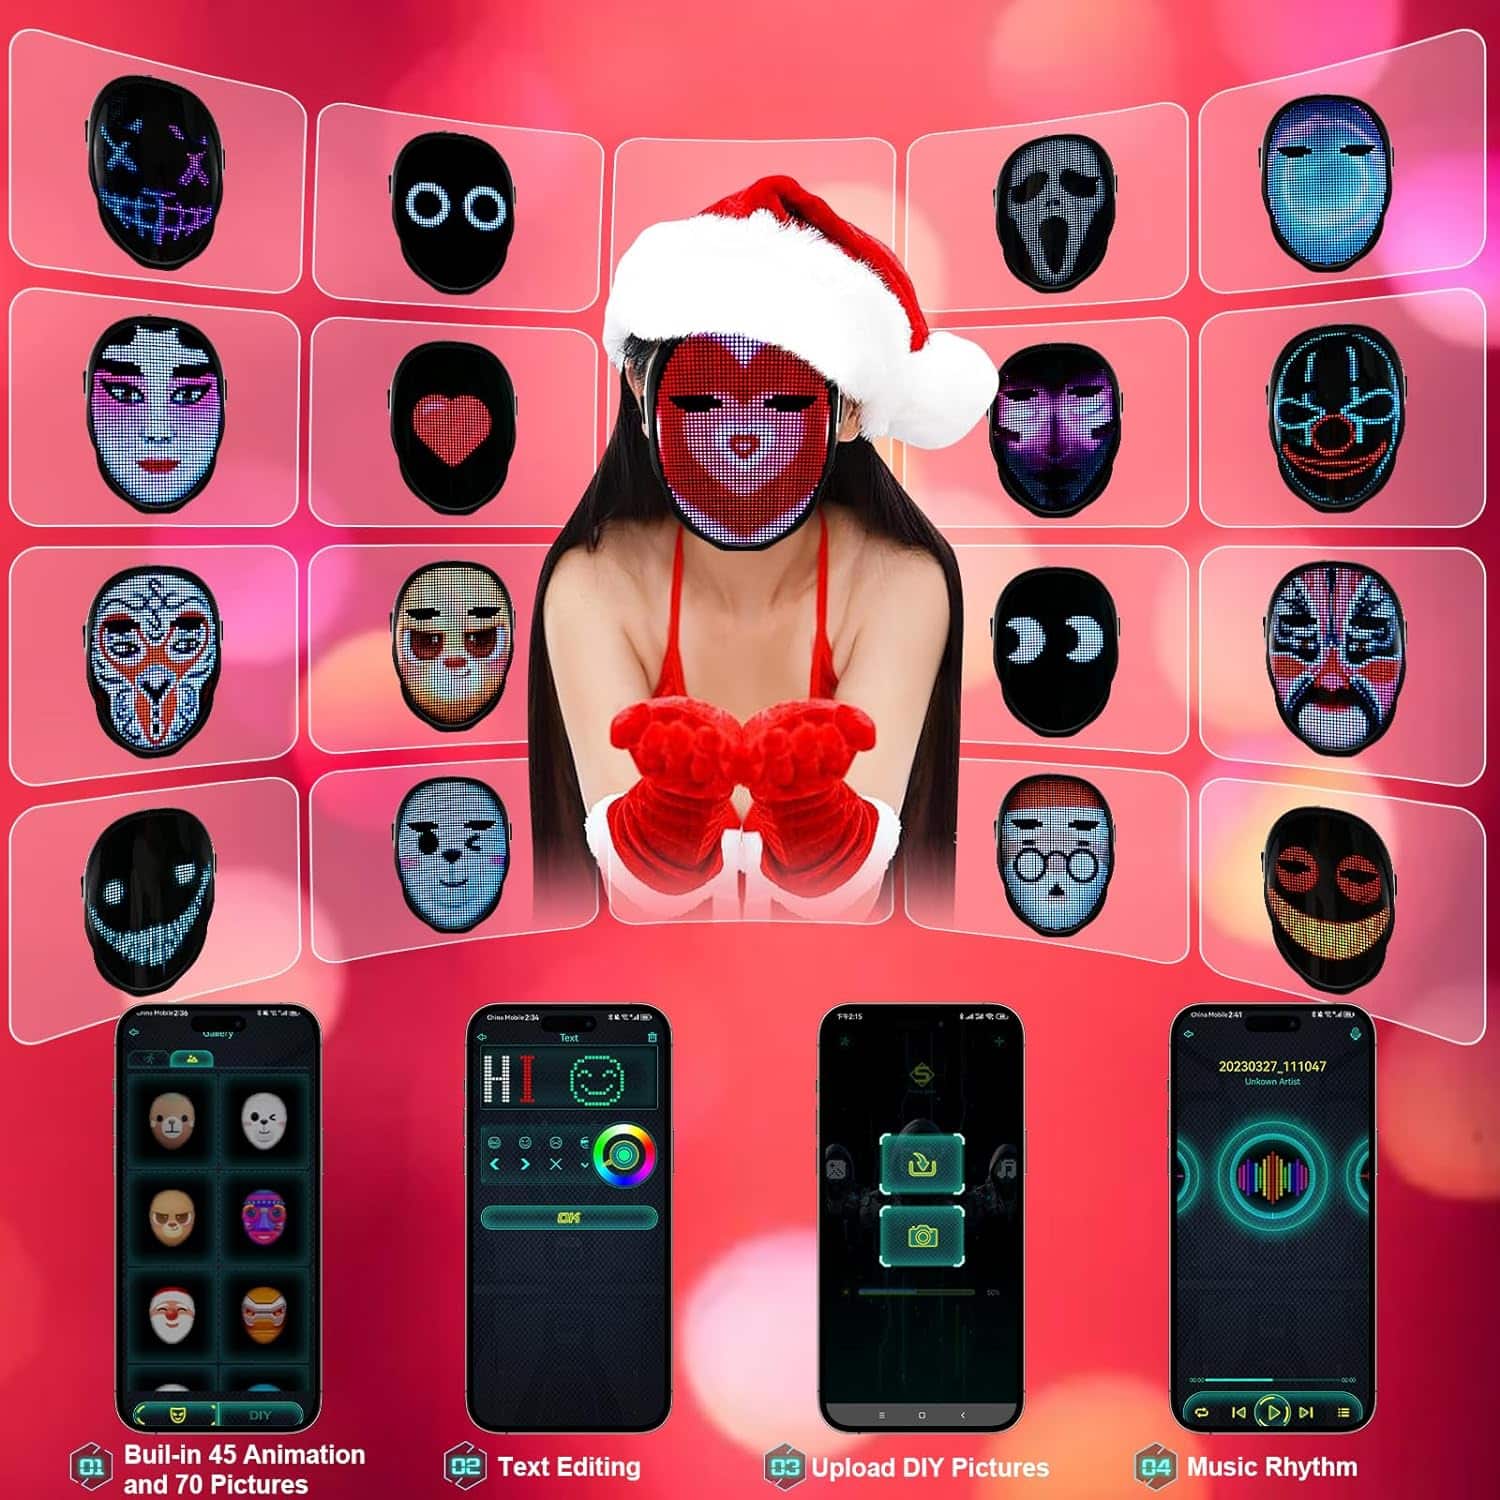 LED Smart Mask for Birthday Gift, Face Changing LED Mask,Boywithuk Mask for Adults and Kids Valentines Day Masquerade